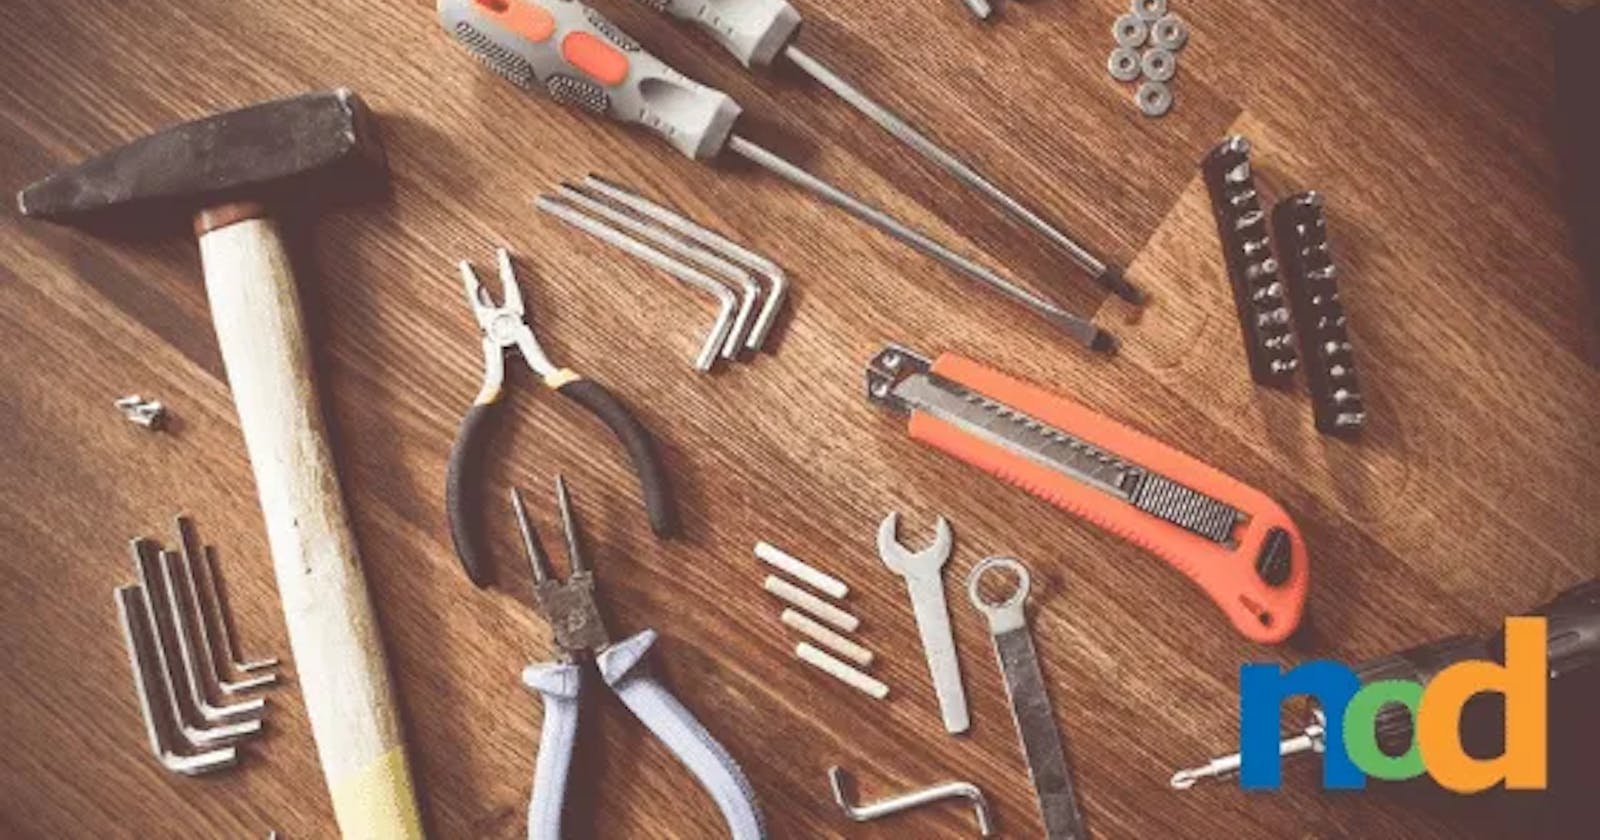 Tools for web developers to work smarter and not harder